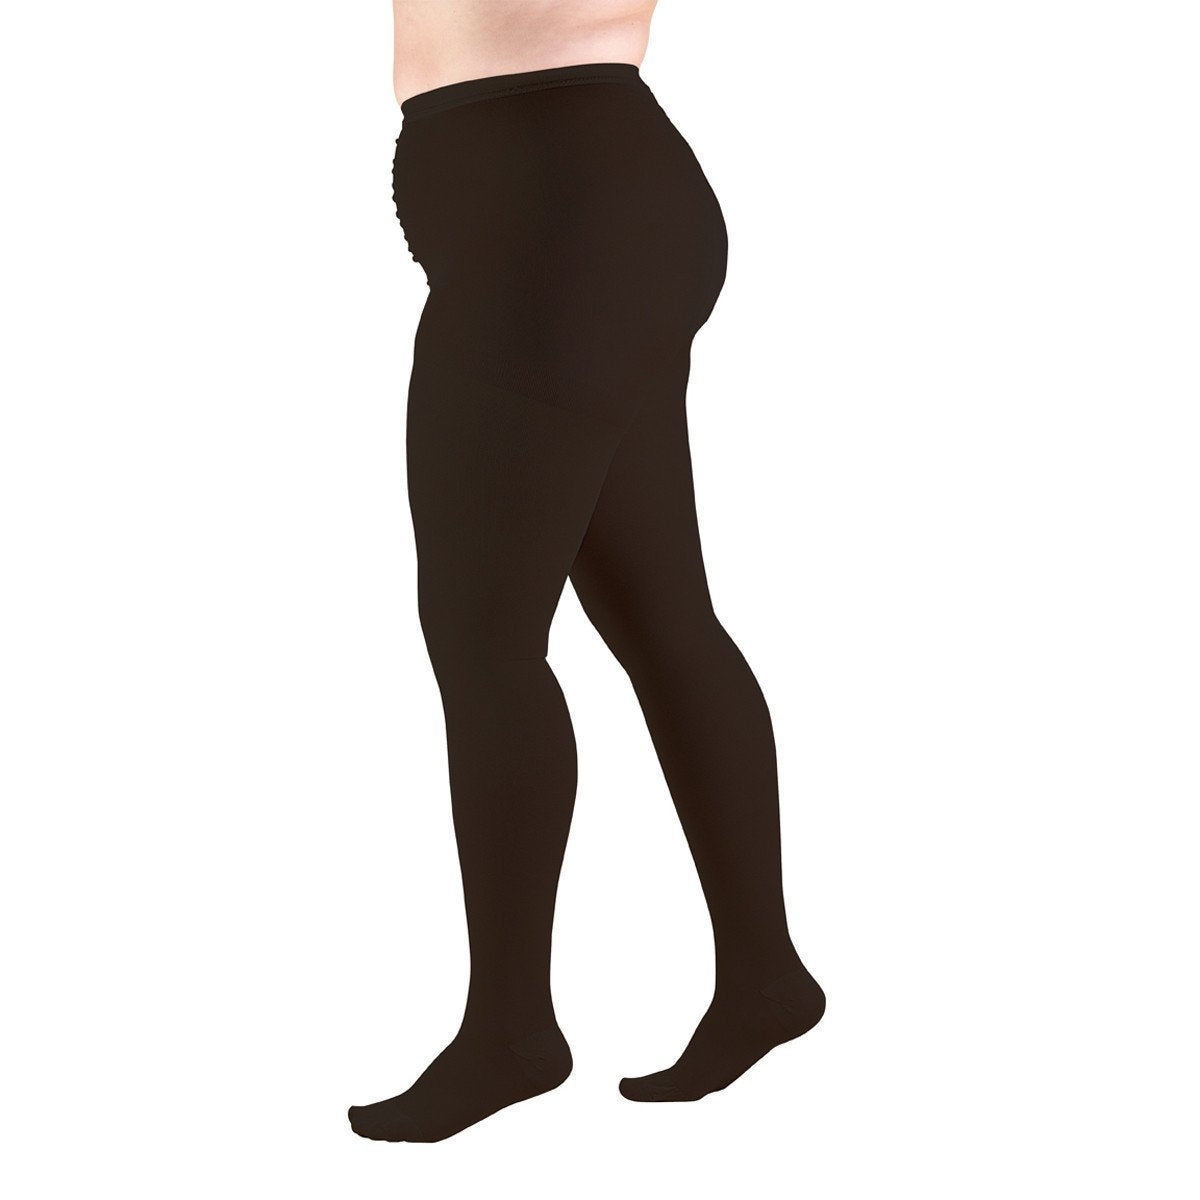 Plus Size Opaque Compression Pantyhose For Women 20-30mmHg - Toeless  Graduated Support Compression Tights For Post Surgery